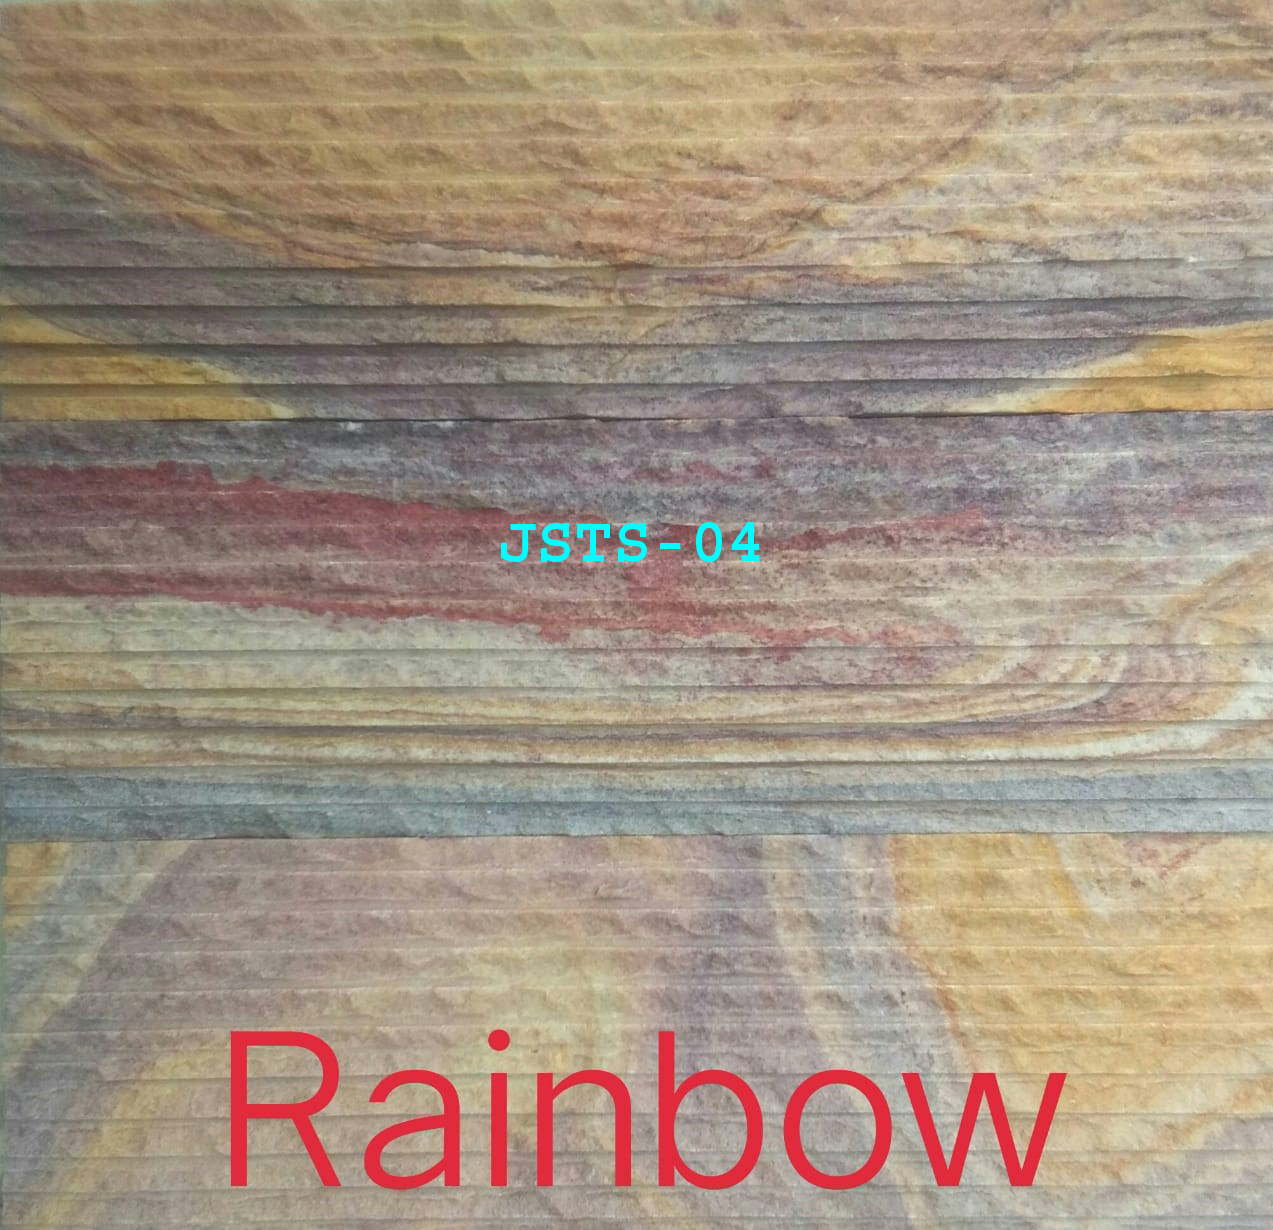 Rainbow Sandstone Chip Out Stone Wall Cladding